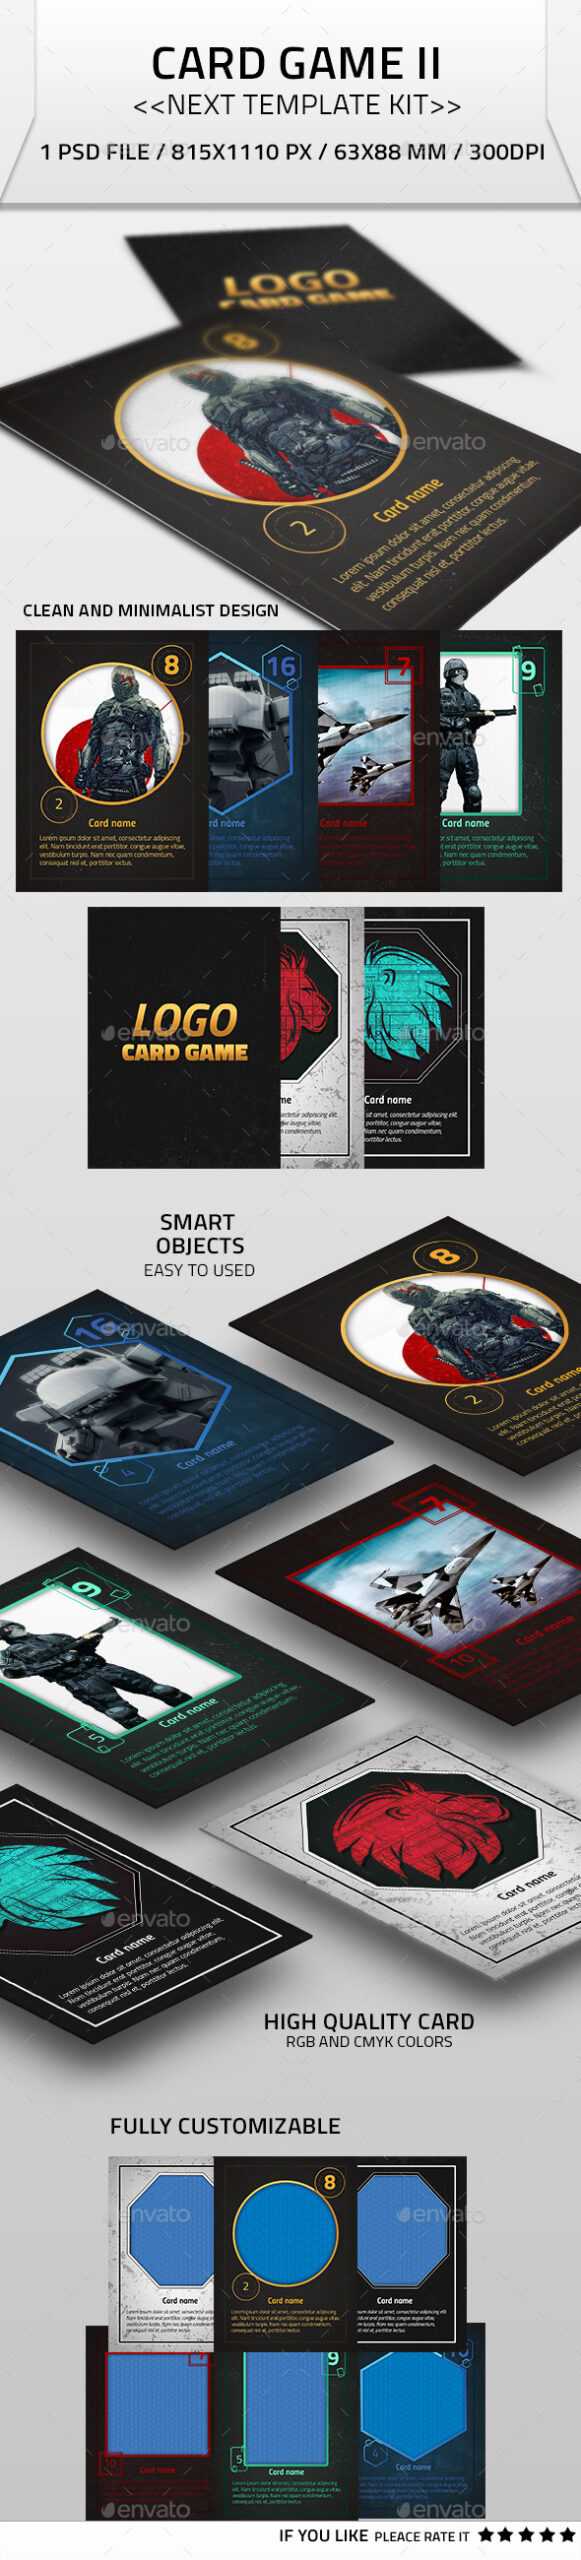 Card Game Graphics, Designs & Templates From Graphicriver With Regard To Superhero Trading Card Template